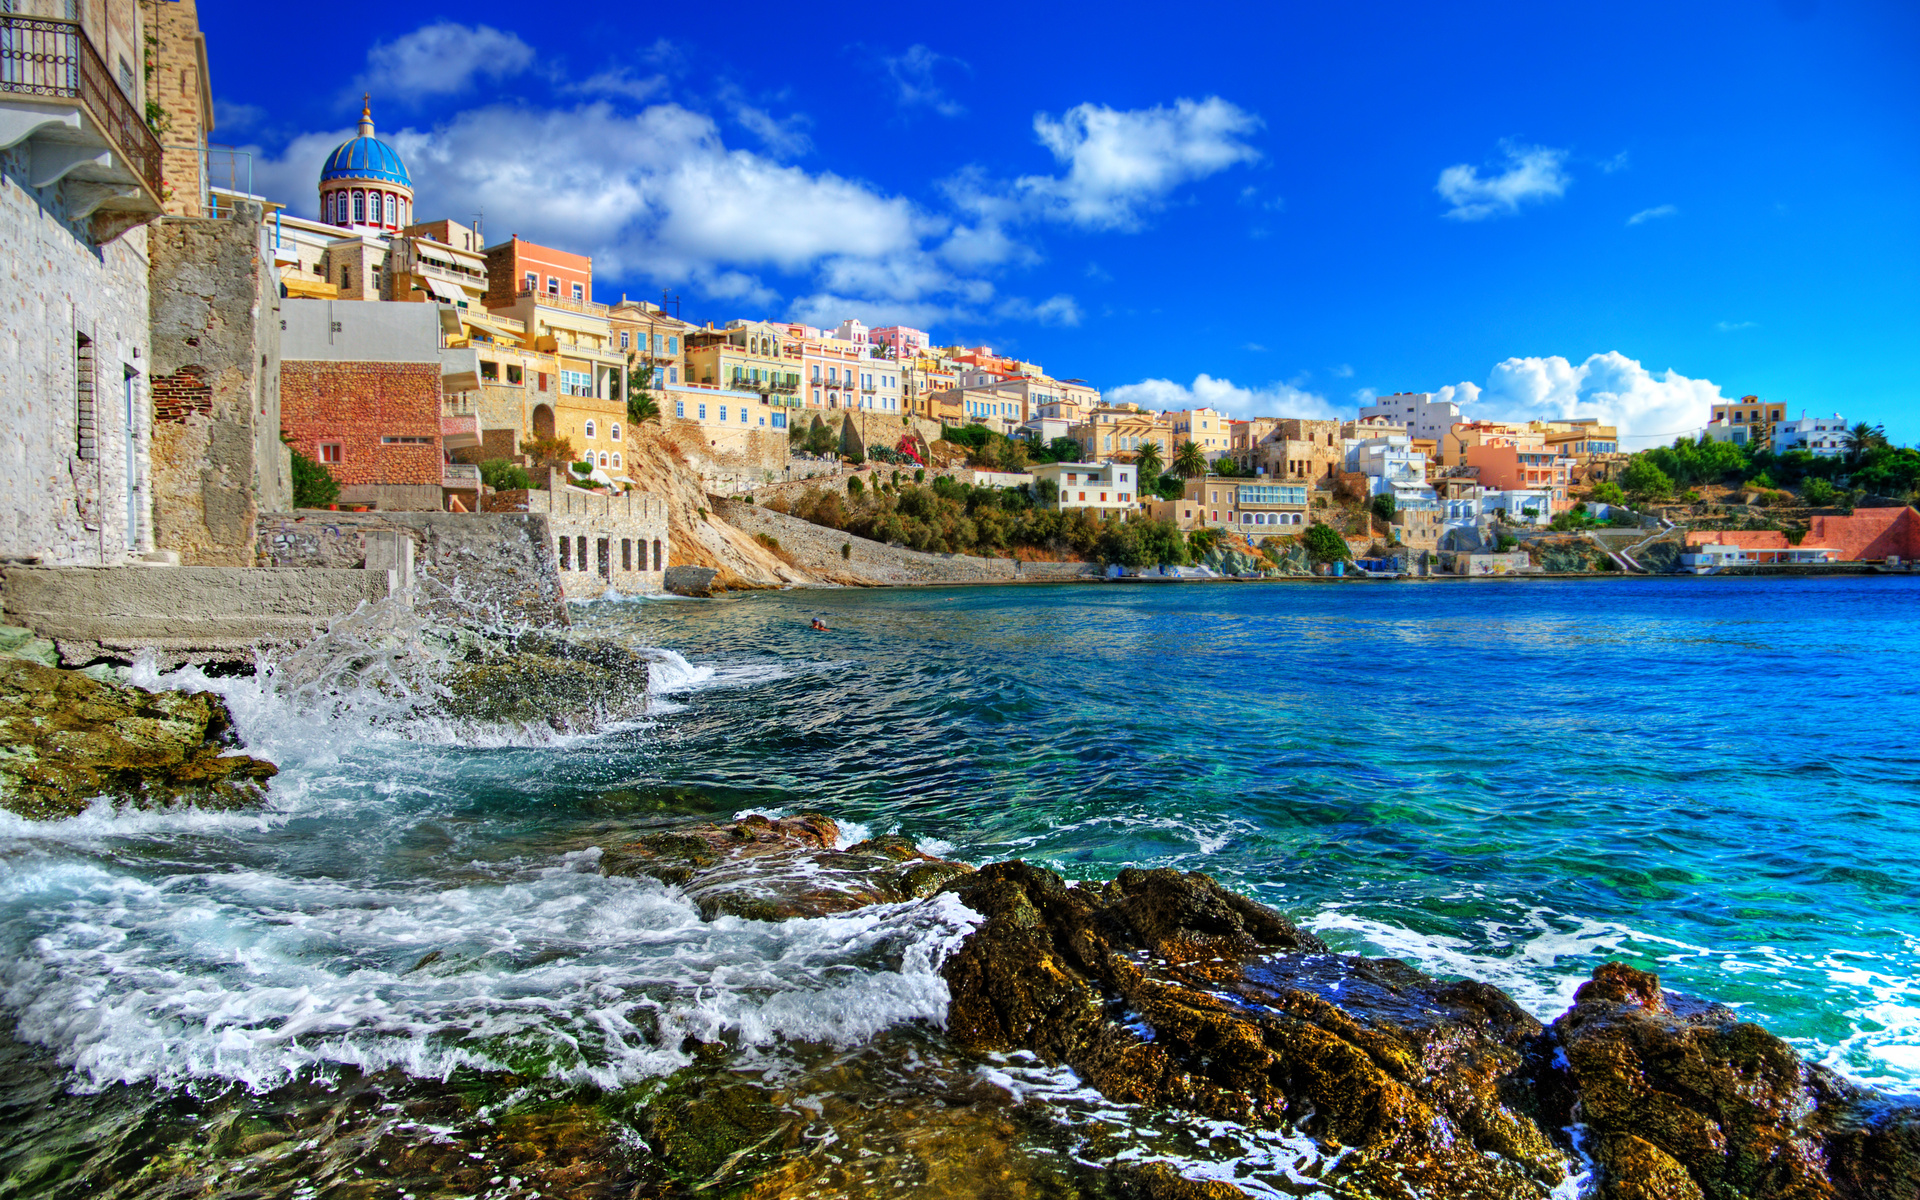 greek, Islands, Syros, Greece, Architecture, Buildings, Houses, Cliff, Shore, Coast, Tropical, Sky, Clouds, Trees, Ocean, Sea, Water, Waves, Rocks Wallpaper